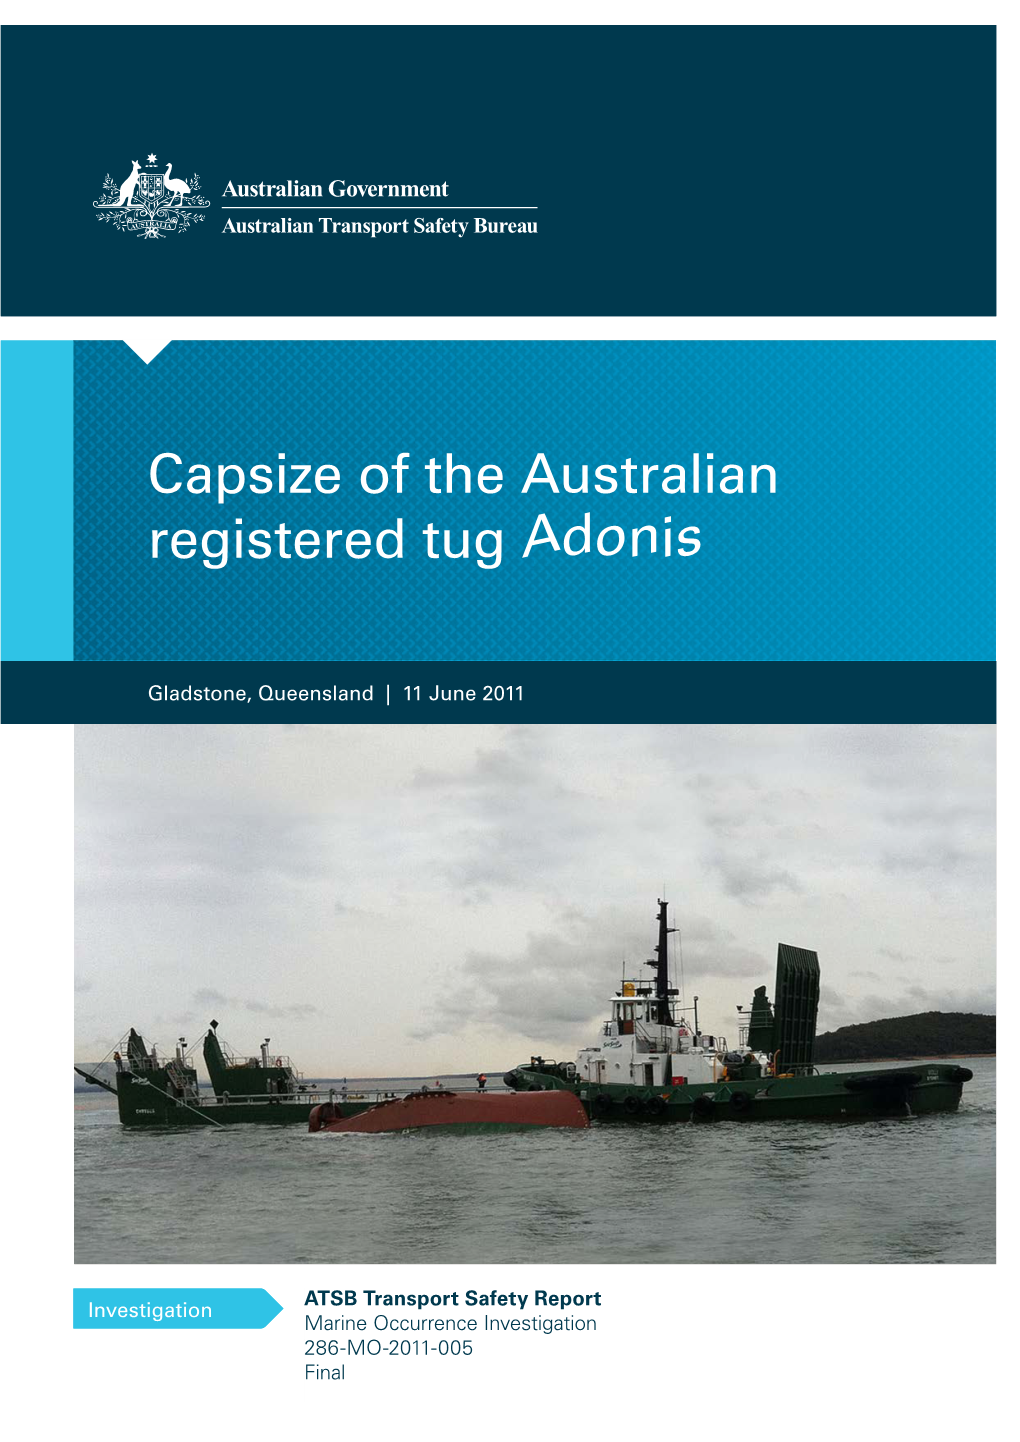 Capsize of the Australian Registered Tug Adonis at Gladstone, Queensland, on 11 June 2011